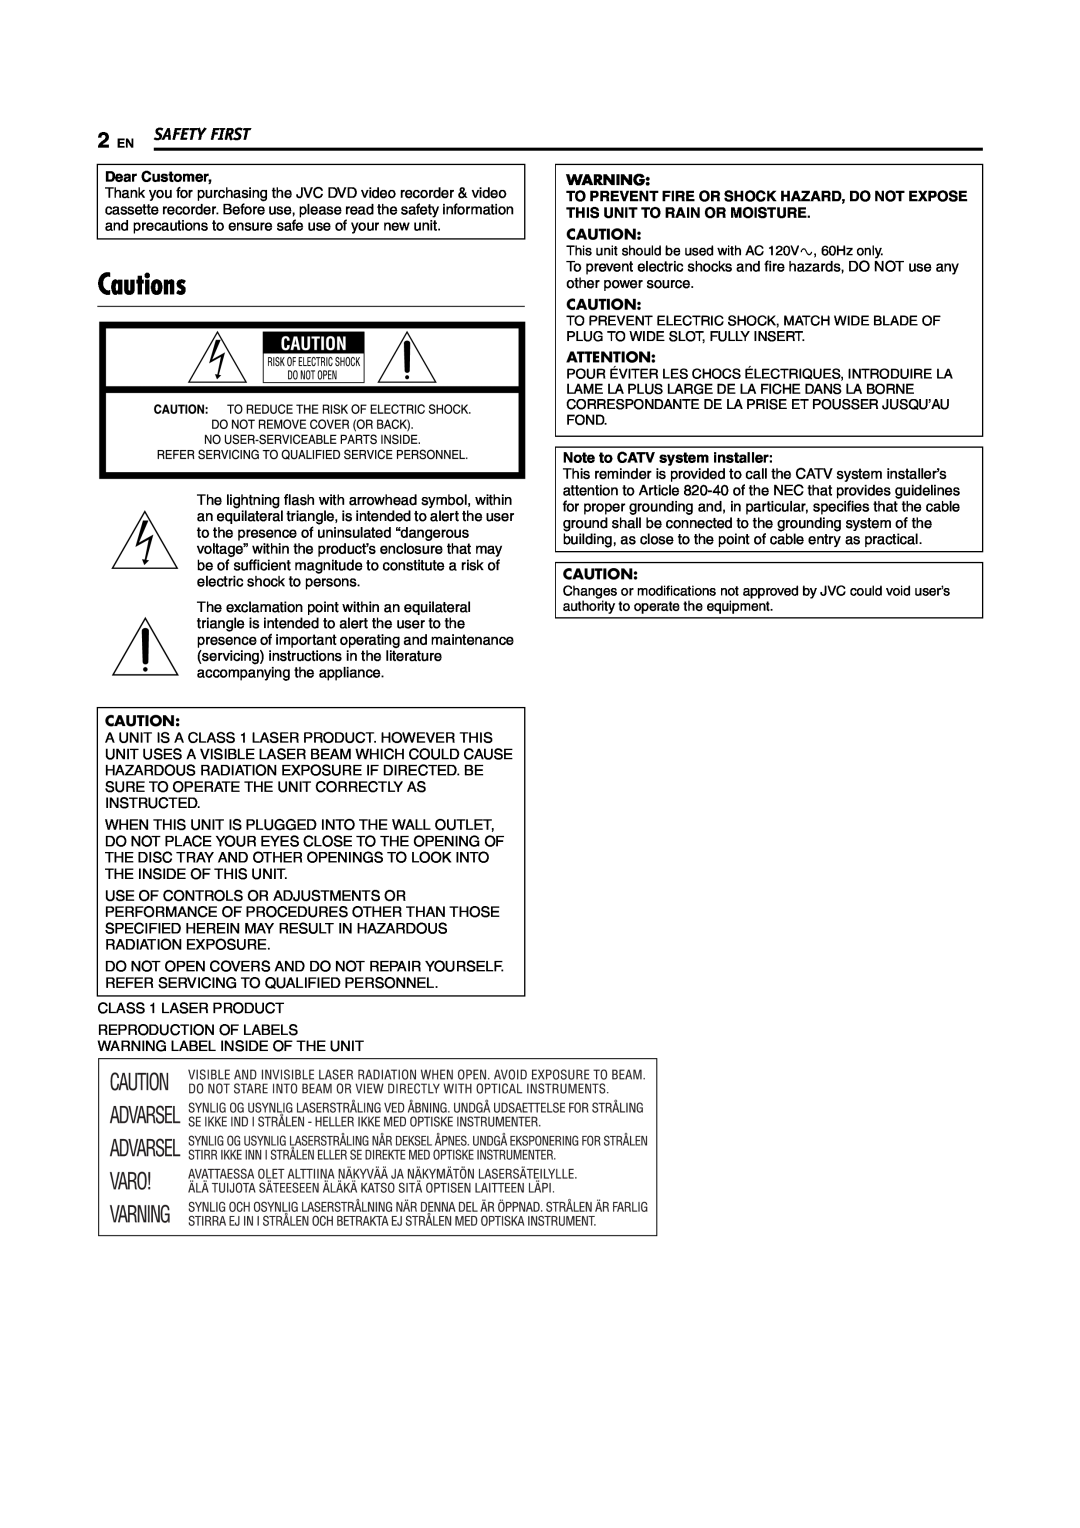 JVC DR-MV5S manual Cautions, Safety First, Dear Customer, Note to CATV system installer 